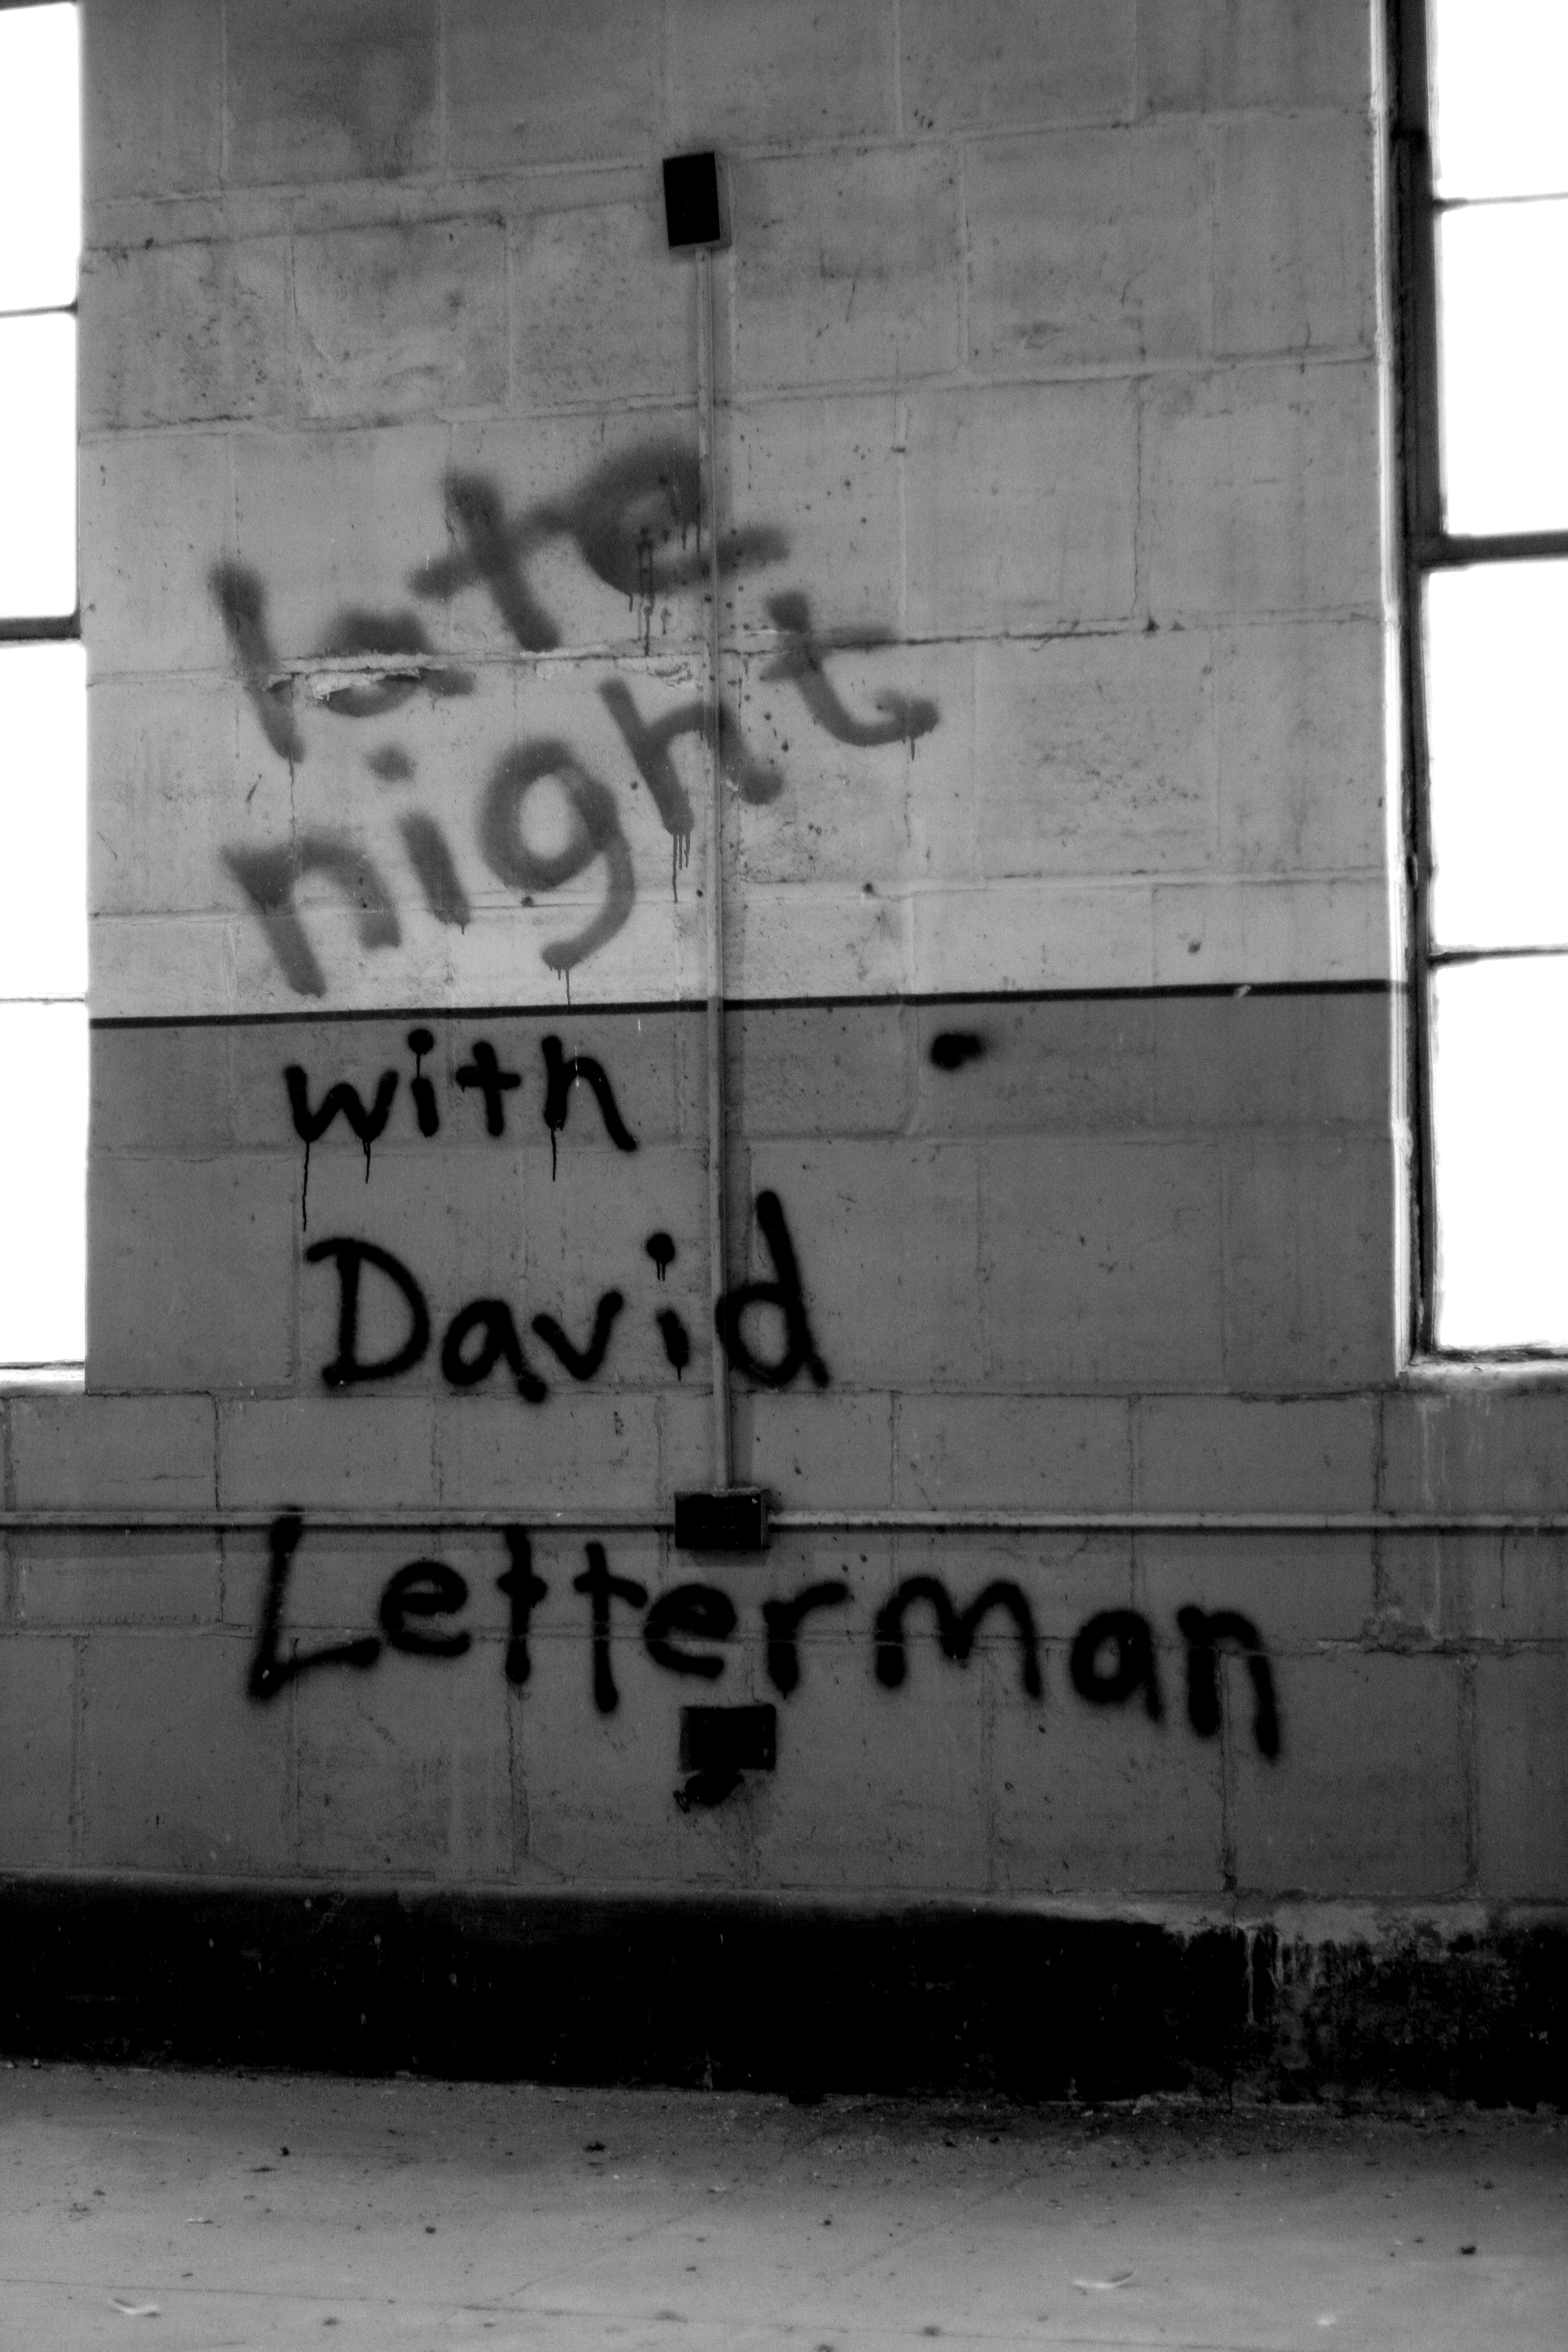 Late Night with David Letterman